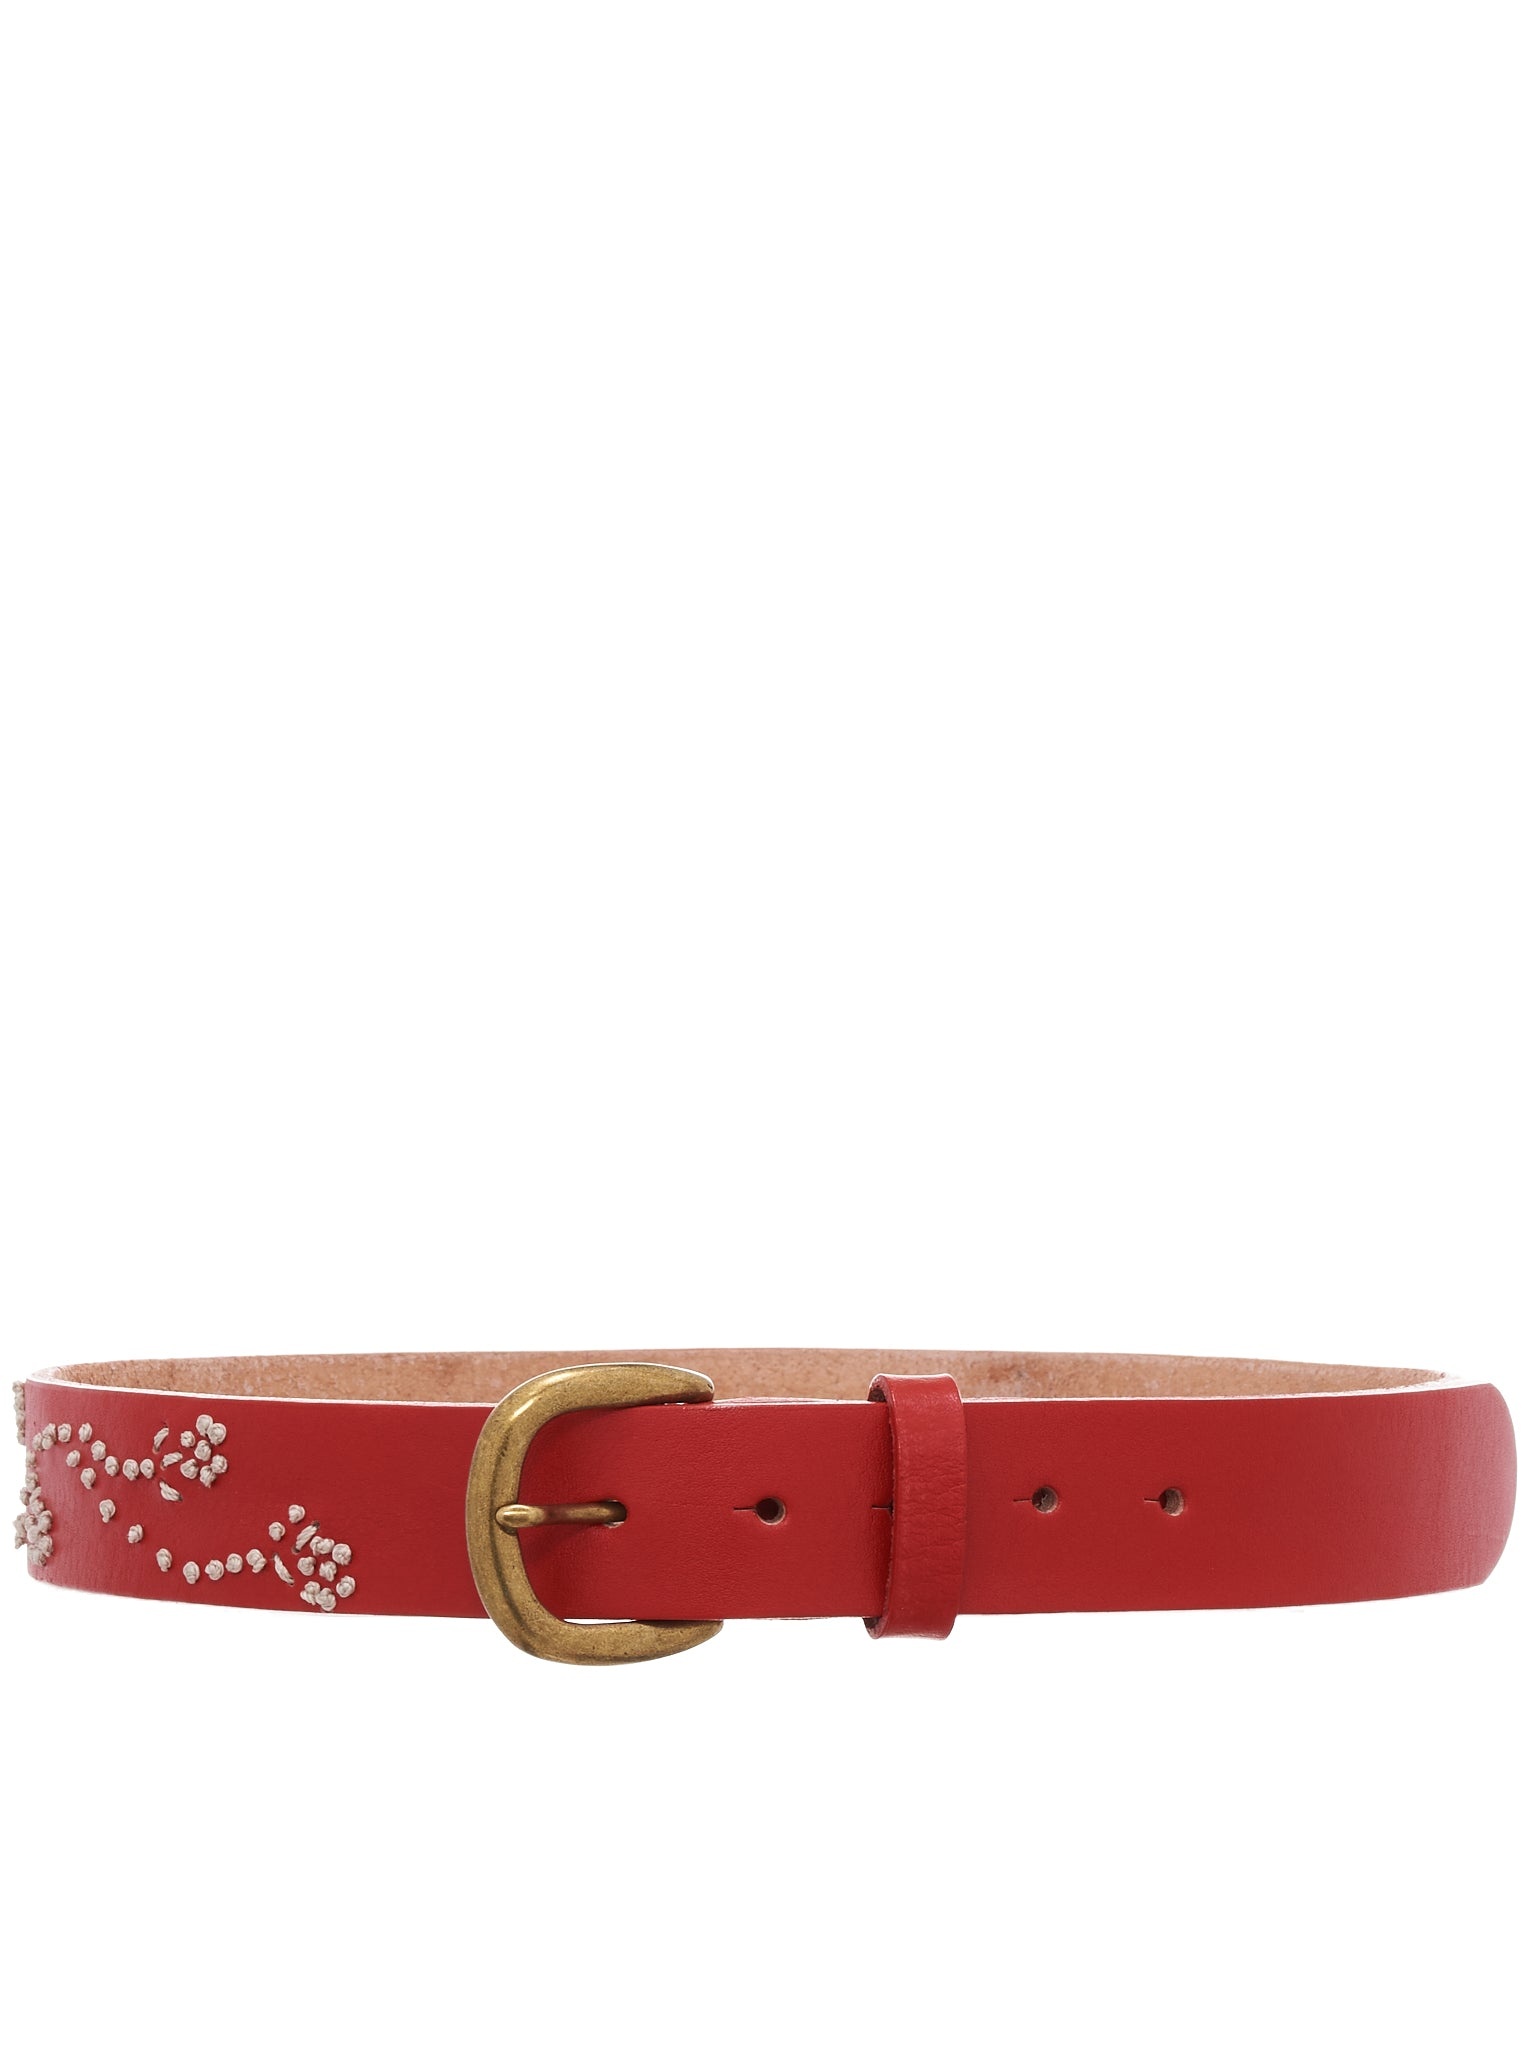 Floral Embroidery Belt - 1